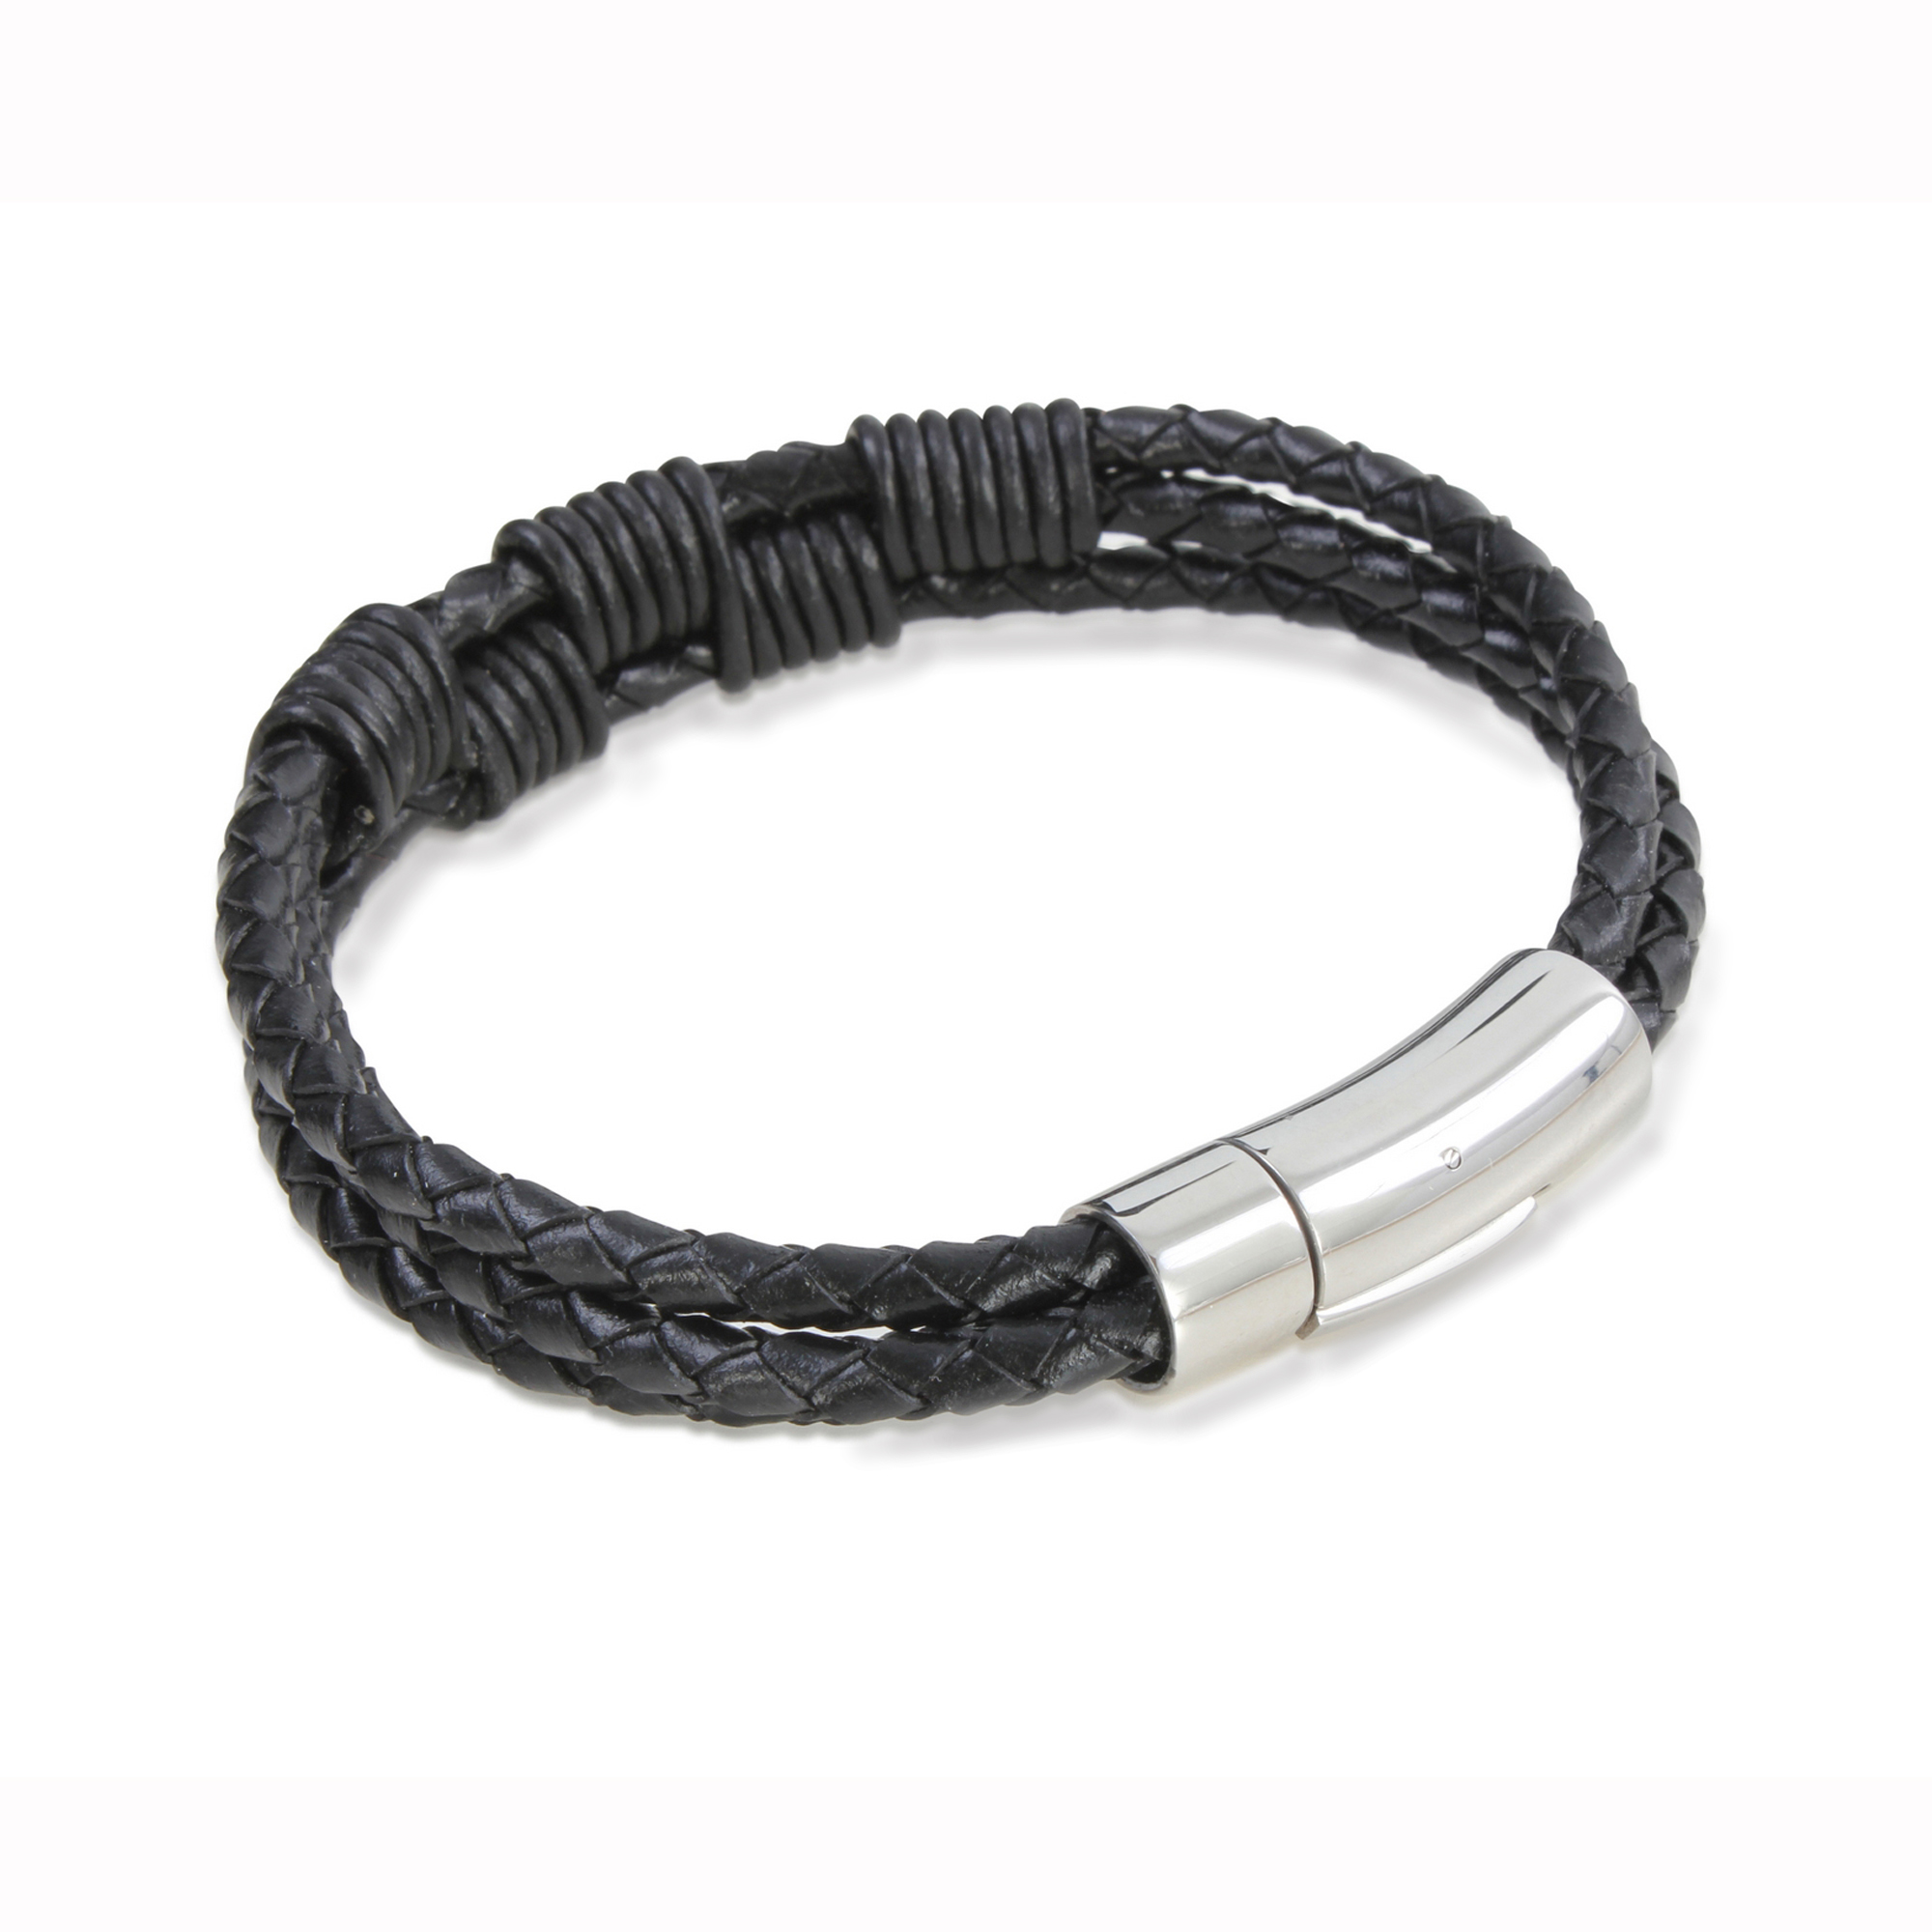 Black Triple Bracelet Twisted design with Stainless Steel Clasp - Dalaco